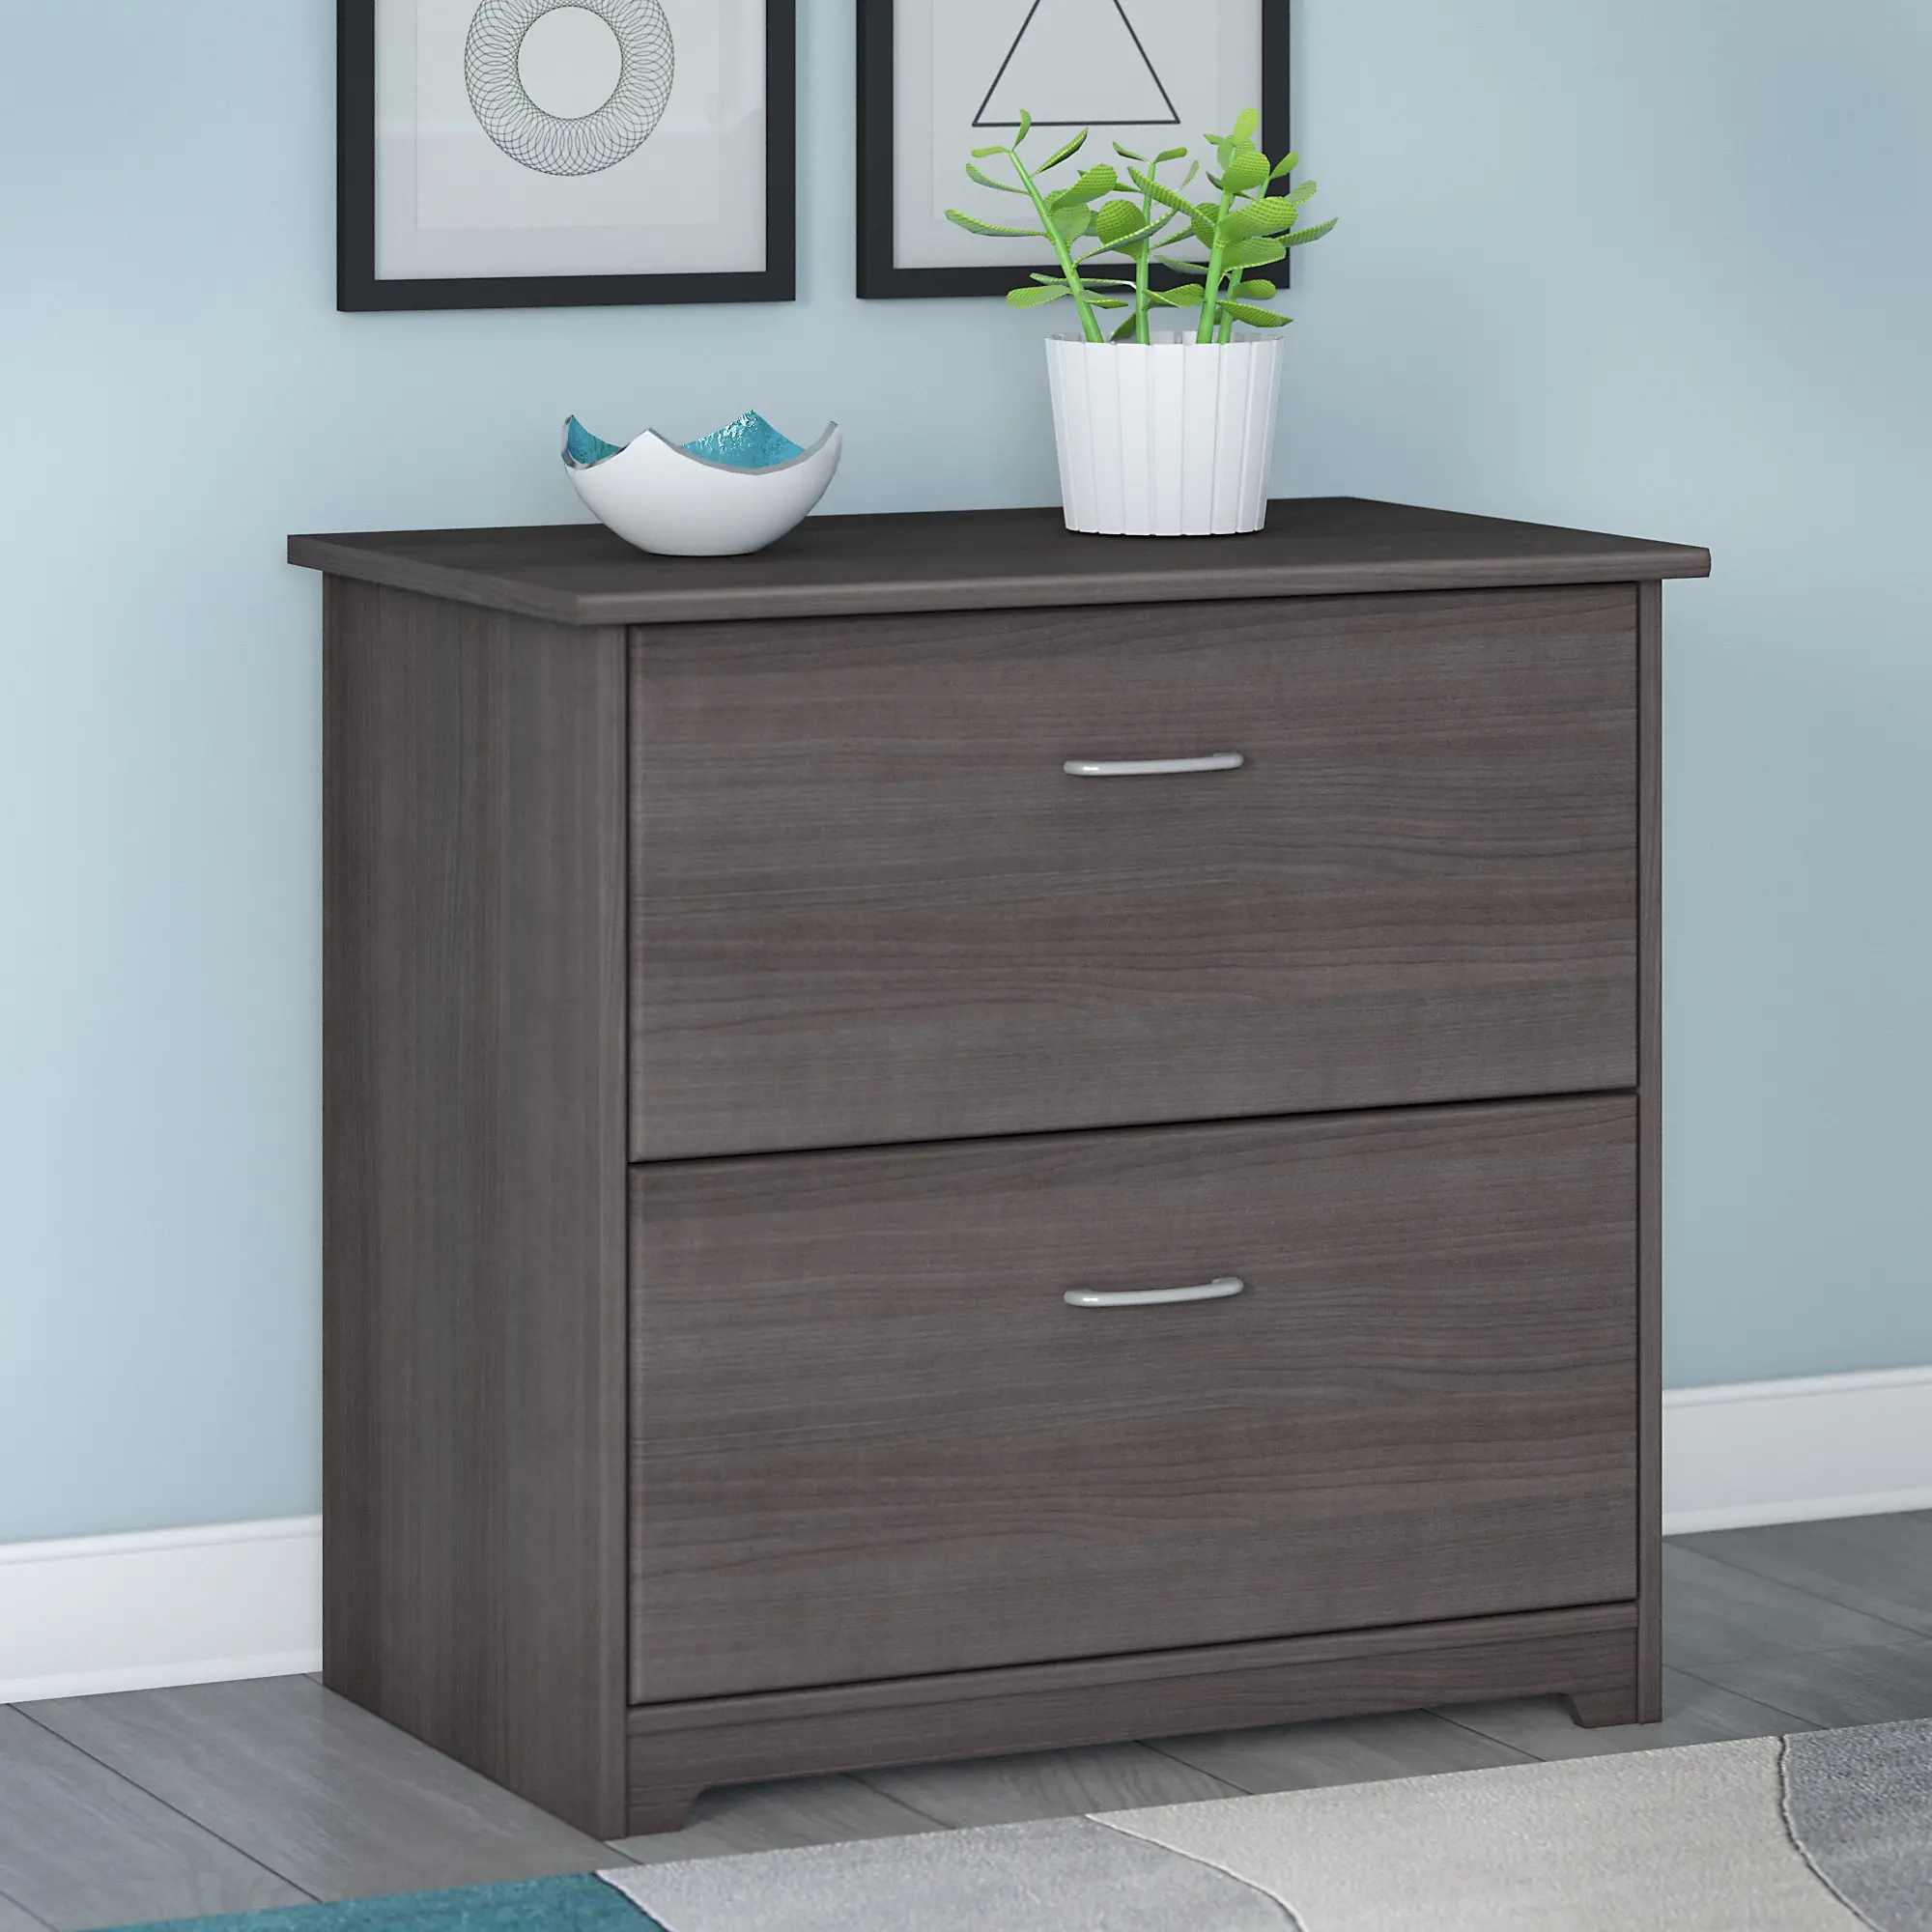 Cabot Heather Gray 2 Drawer Lateral File Cabinet - Bush Furniture